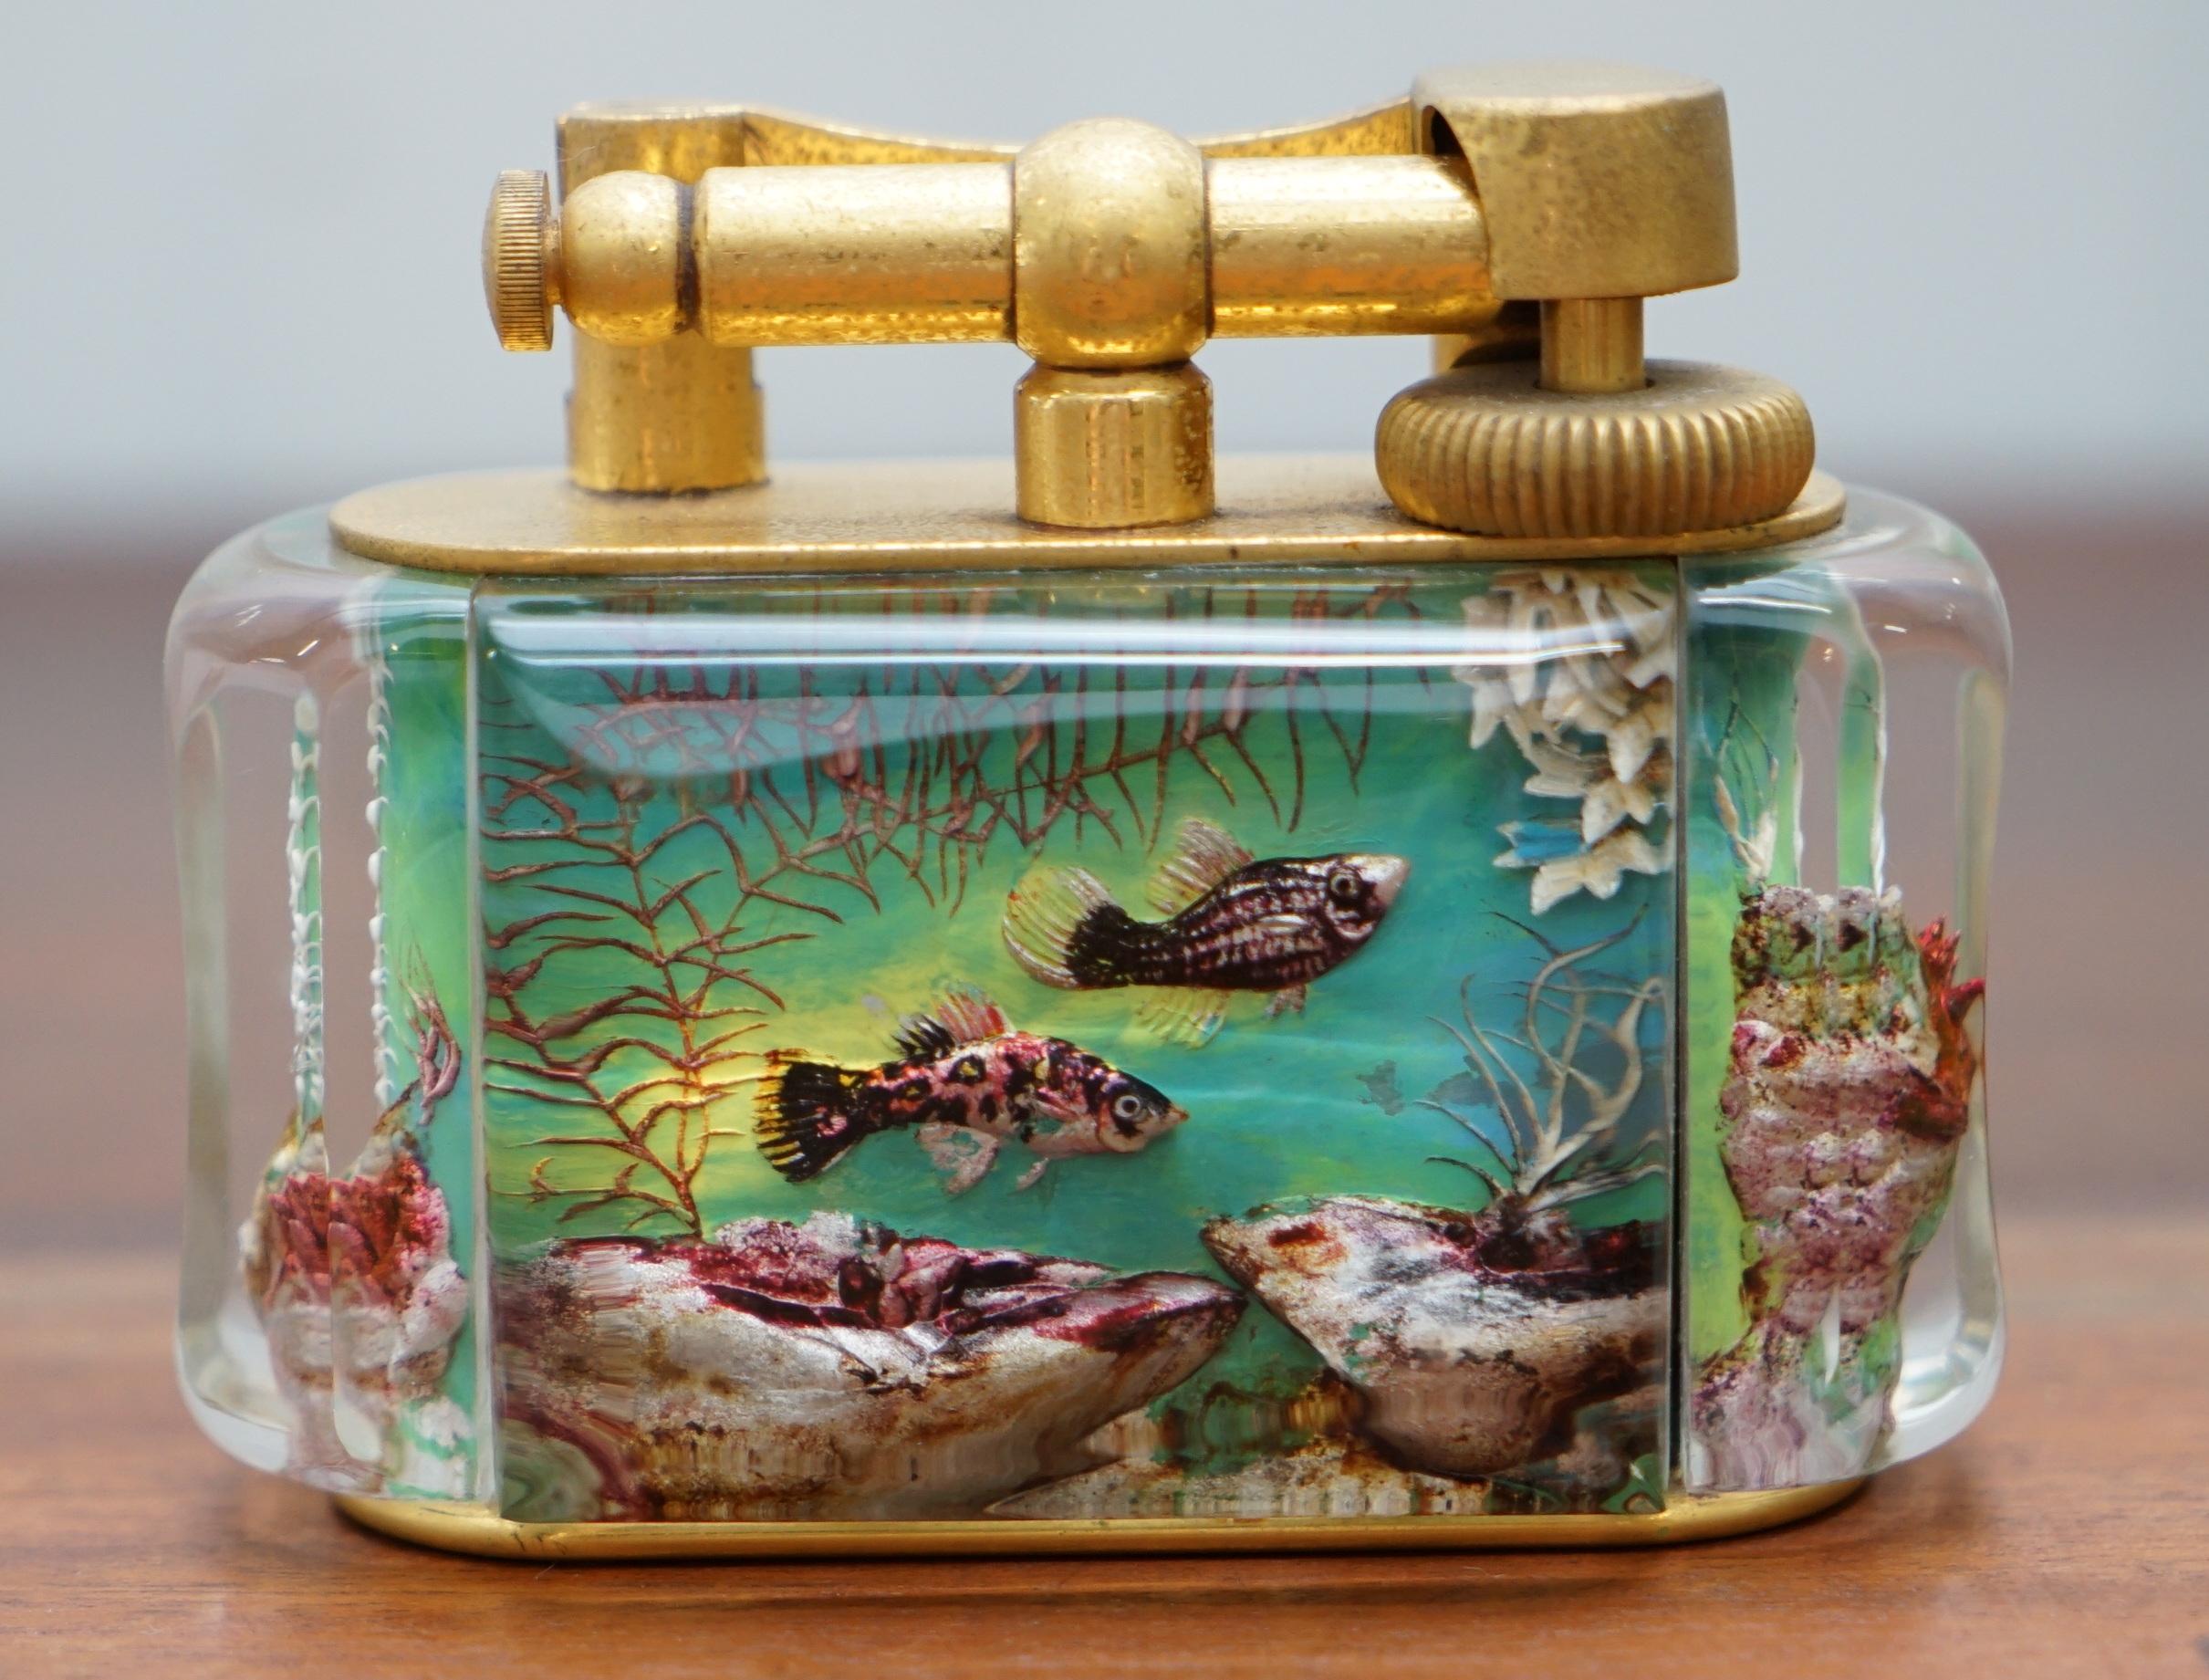 Mid-Century Modern Rare Gold-Plated 1950s Dunhill Aquarium Oversized Table Lighter Made in England